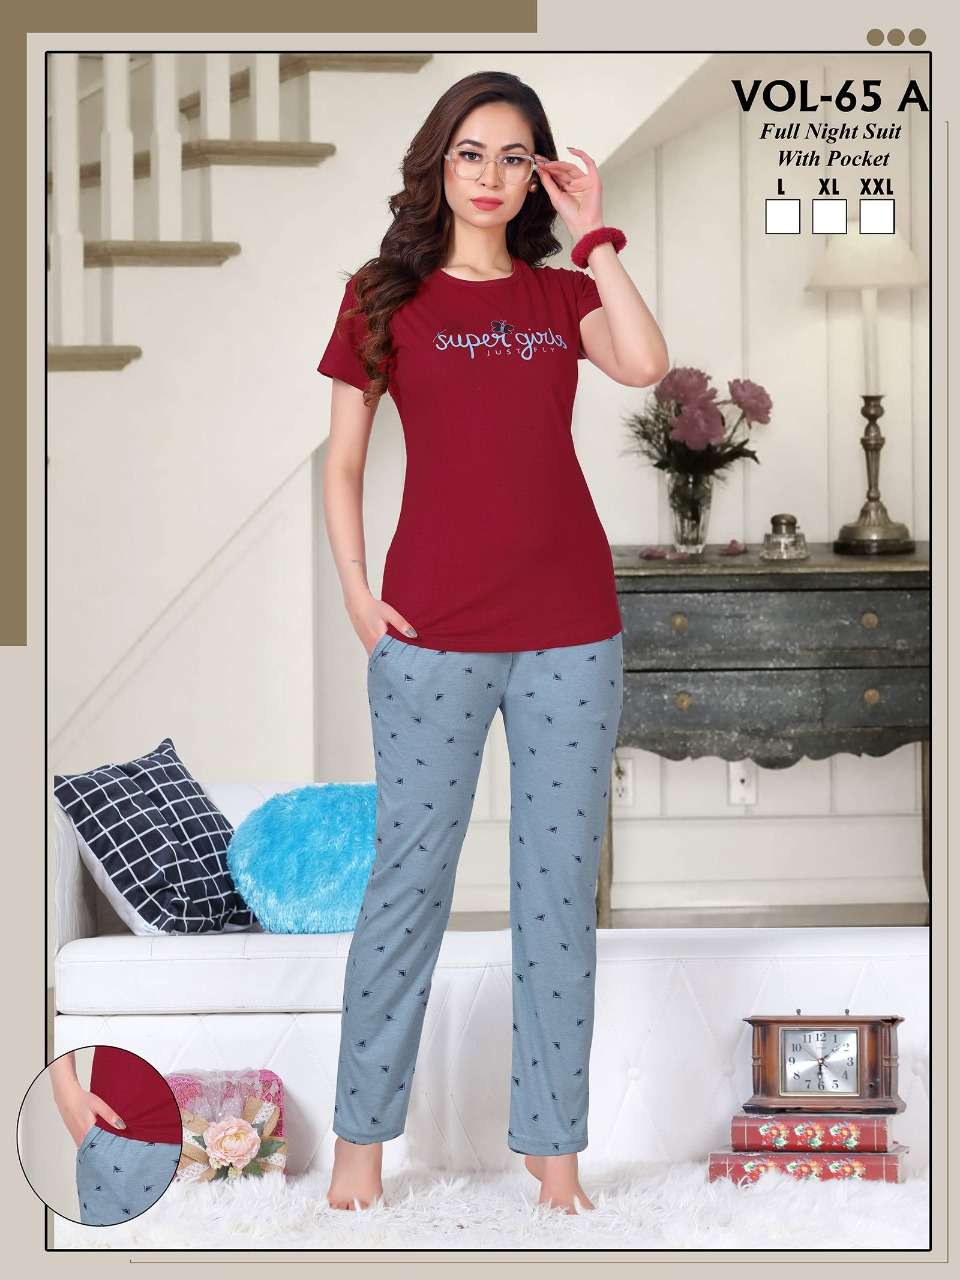 FASHION TALK VOL.65 A Heavy Shinker Hosiery Cotton Night Suits With Pocket CATALOG WHOLESALER BEST RATE